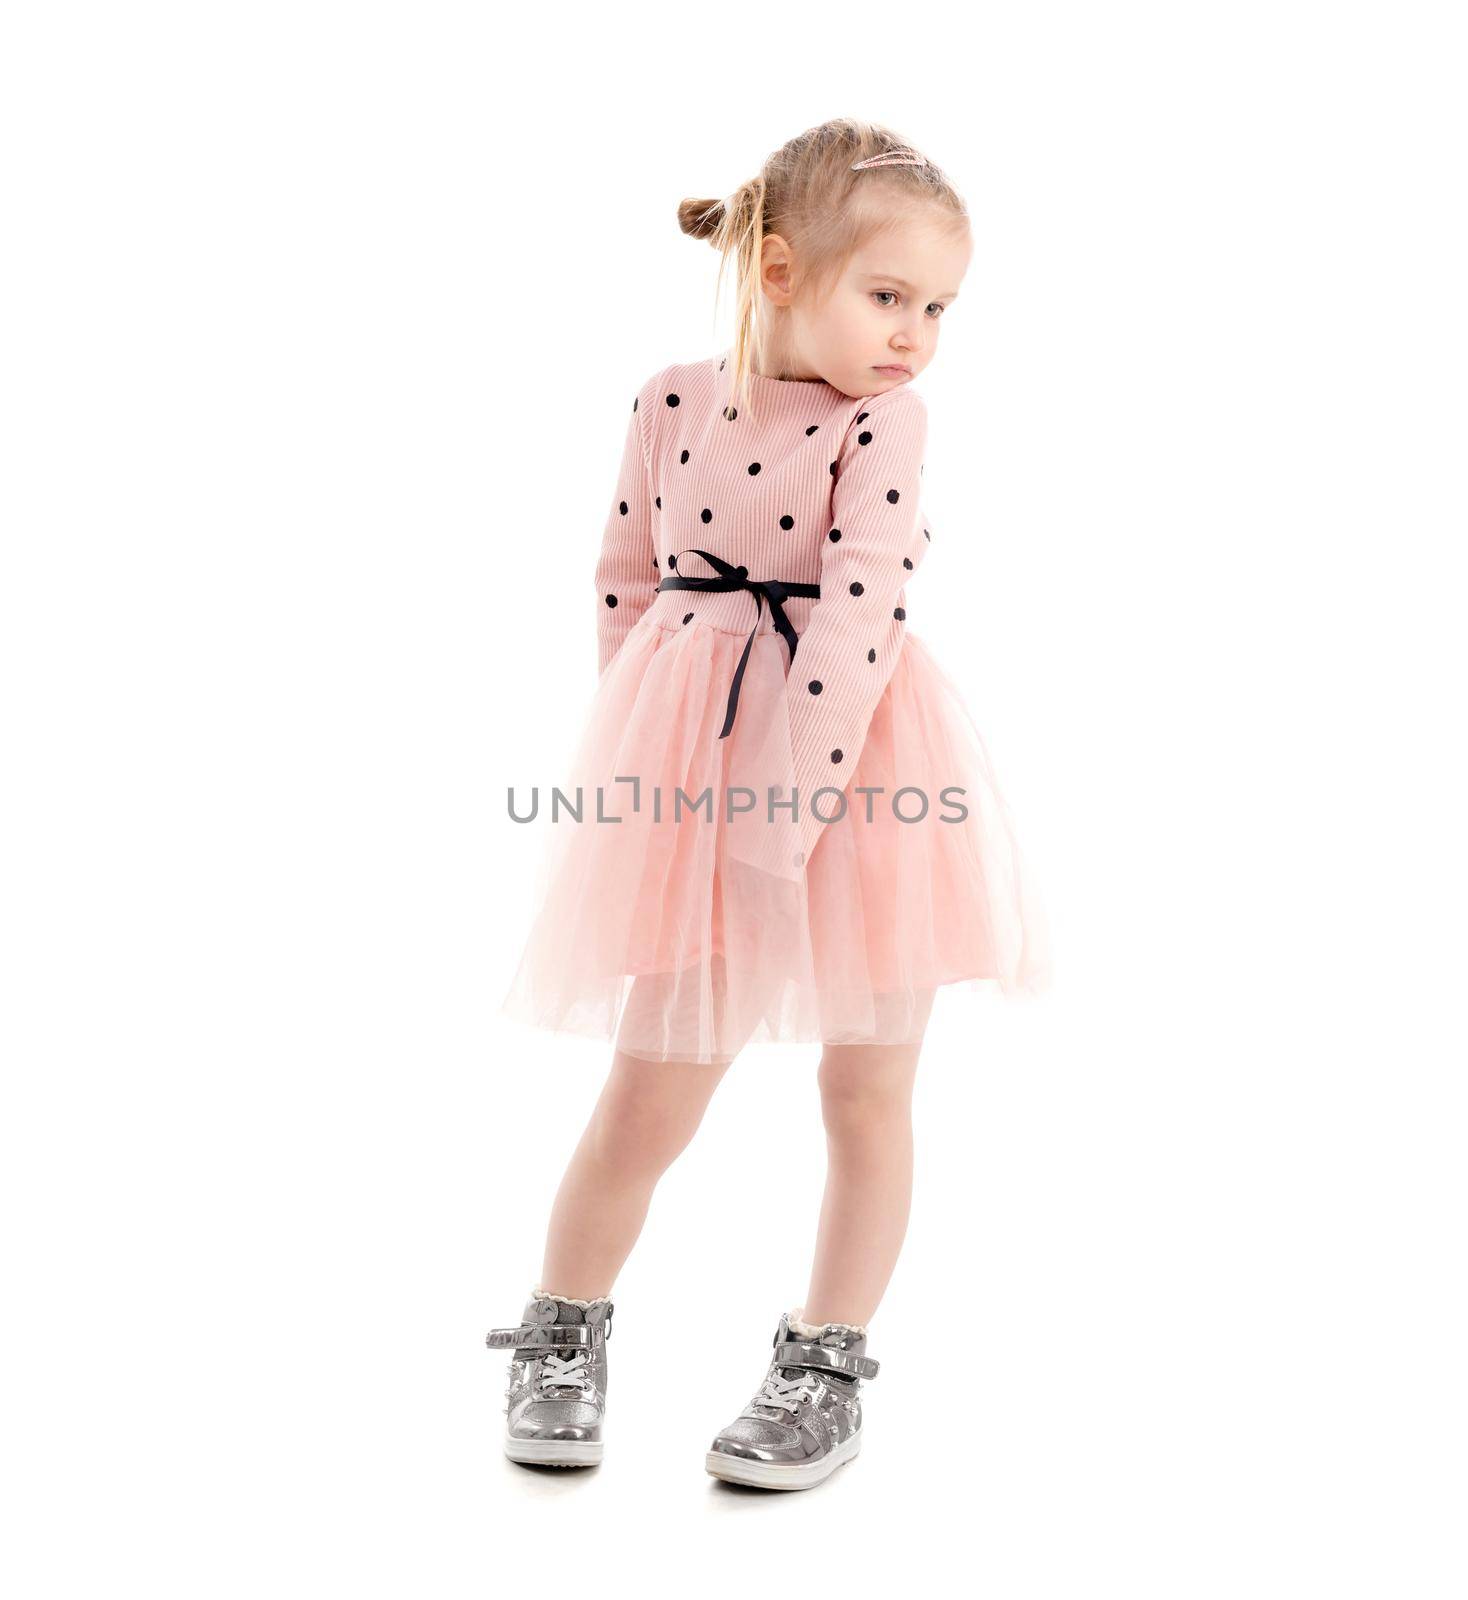 Cute girl spinning around, wearning pink polkadot shirt and skirt, lovely shoes, isolated